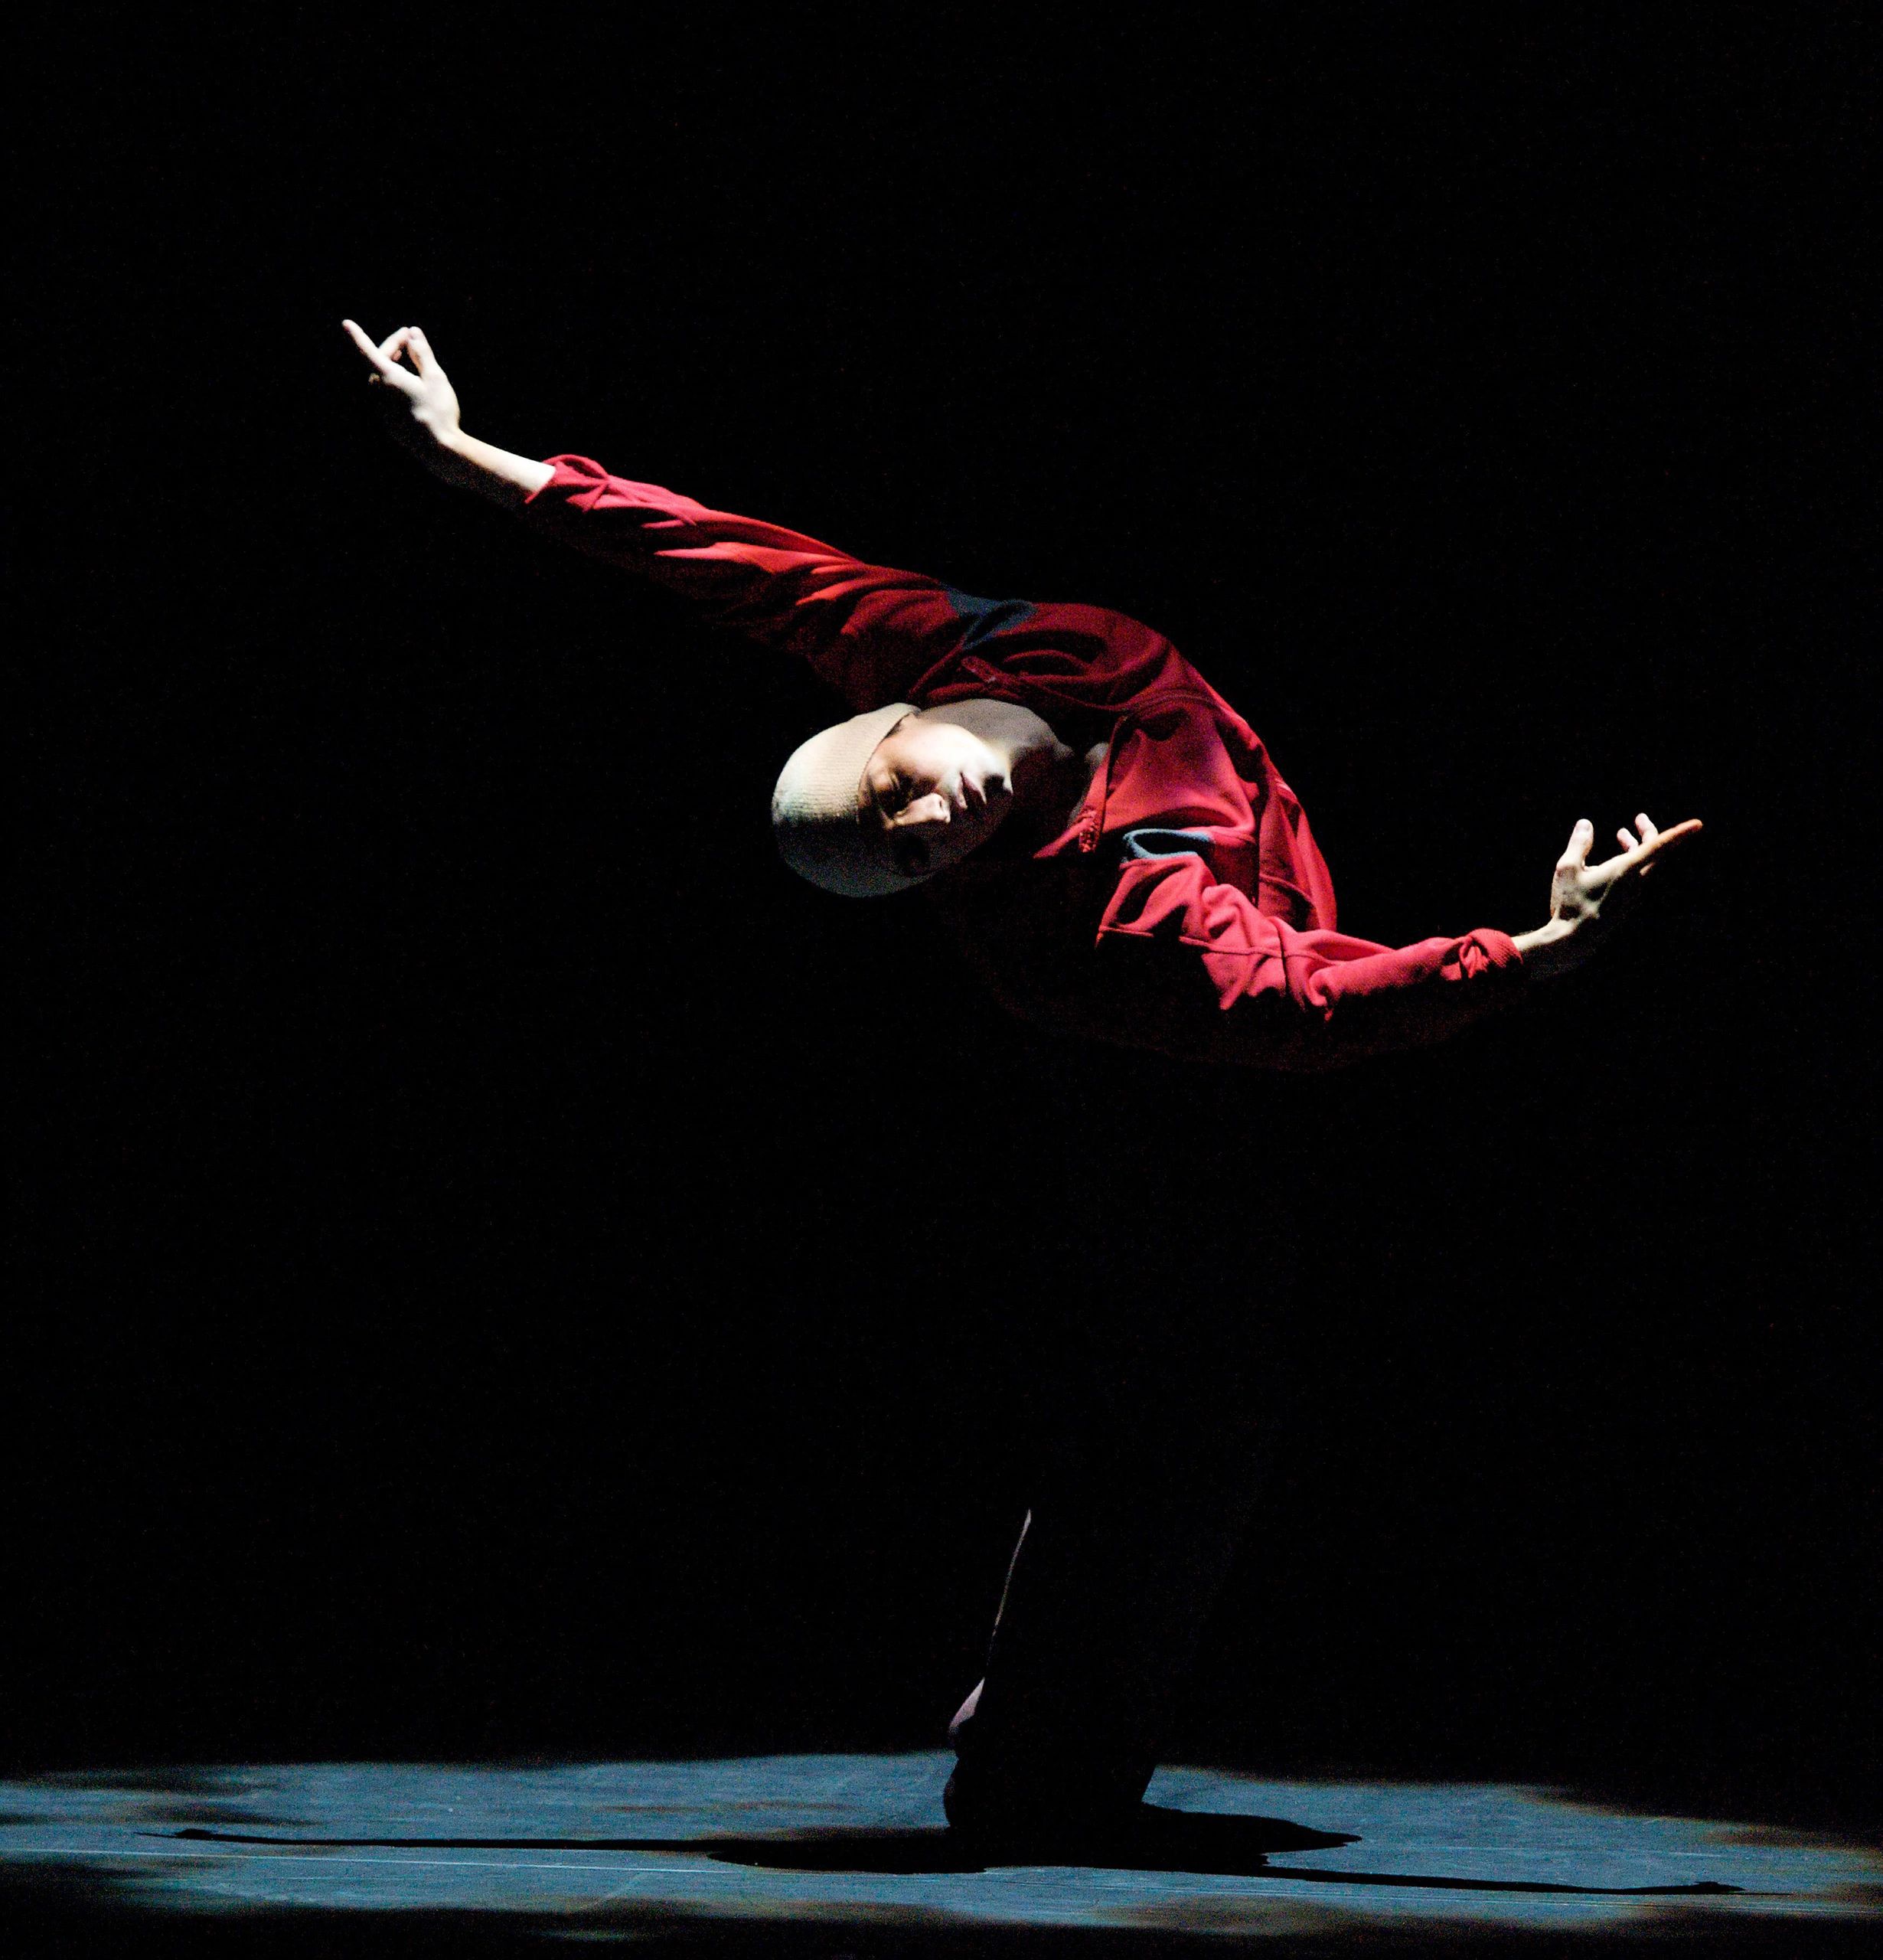 ´Proietto performing AfterLight, dance solo choreographed by R. Maliphant at Sadler's Wells Theater